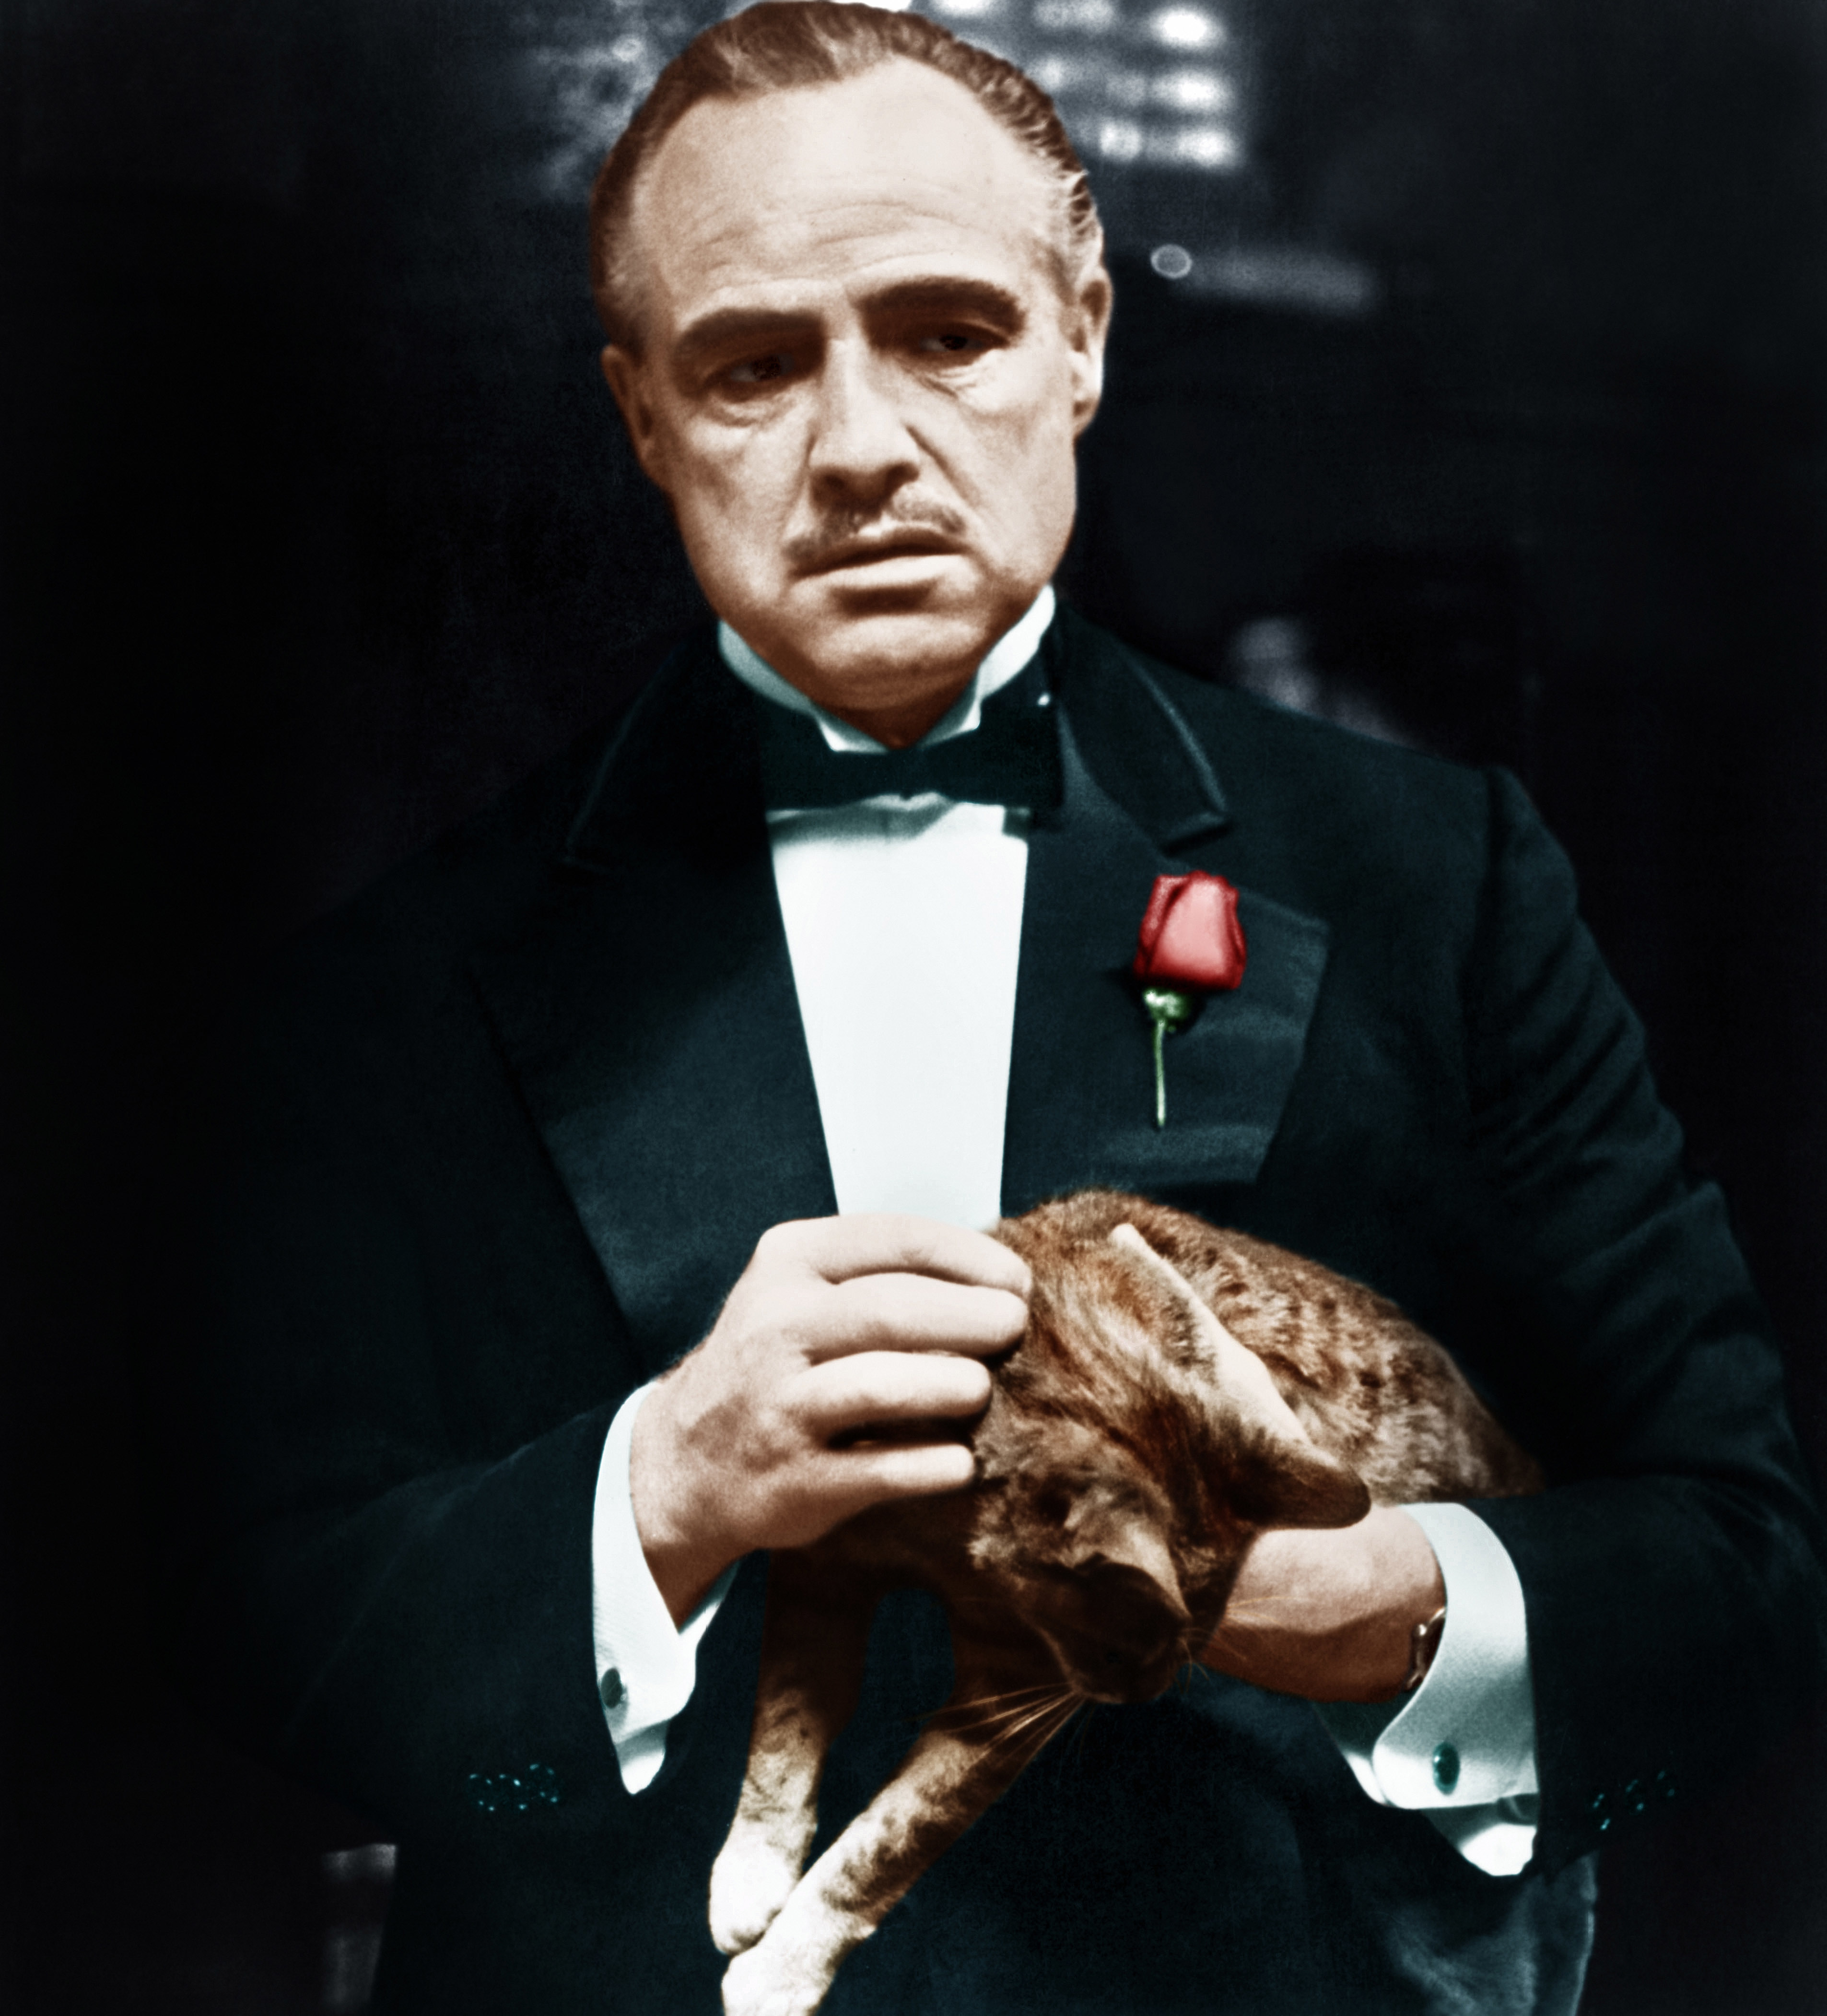 Marlon Brando as Vito Corleone in a tux with a rose, holding a cat, from &#x27;The Godfather&#x27;